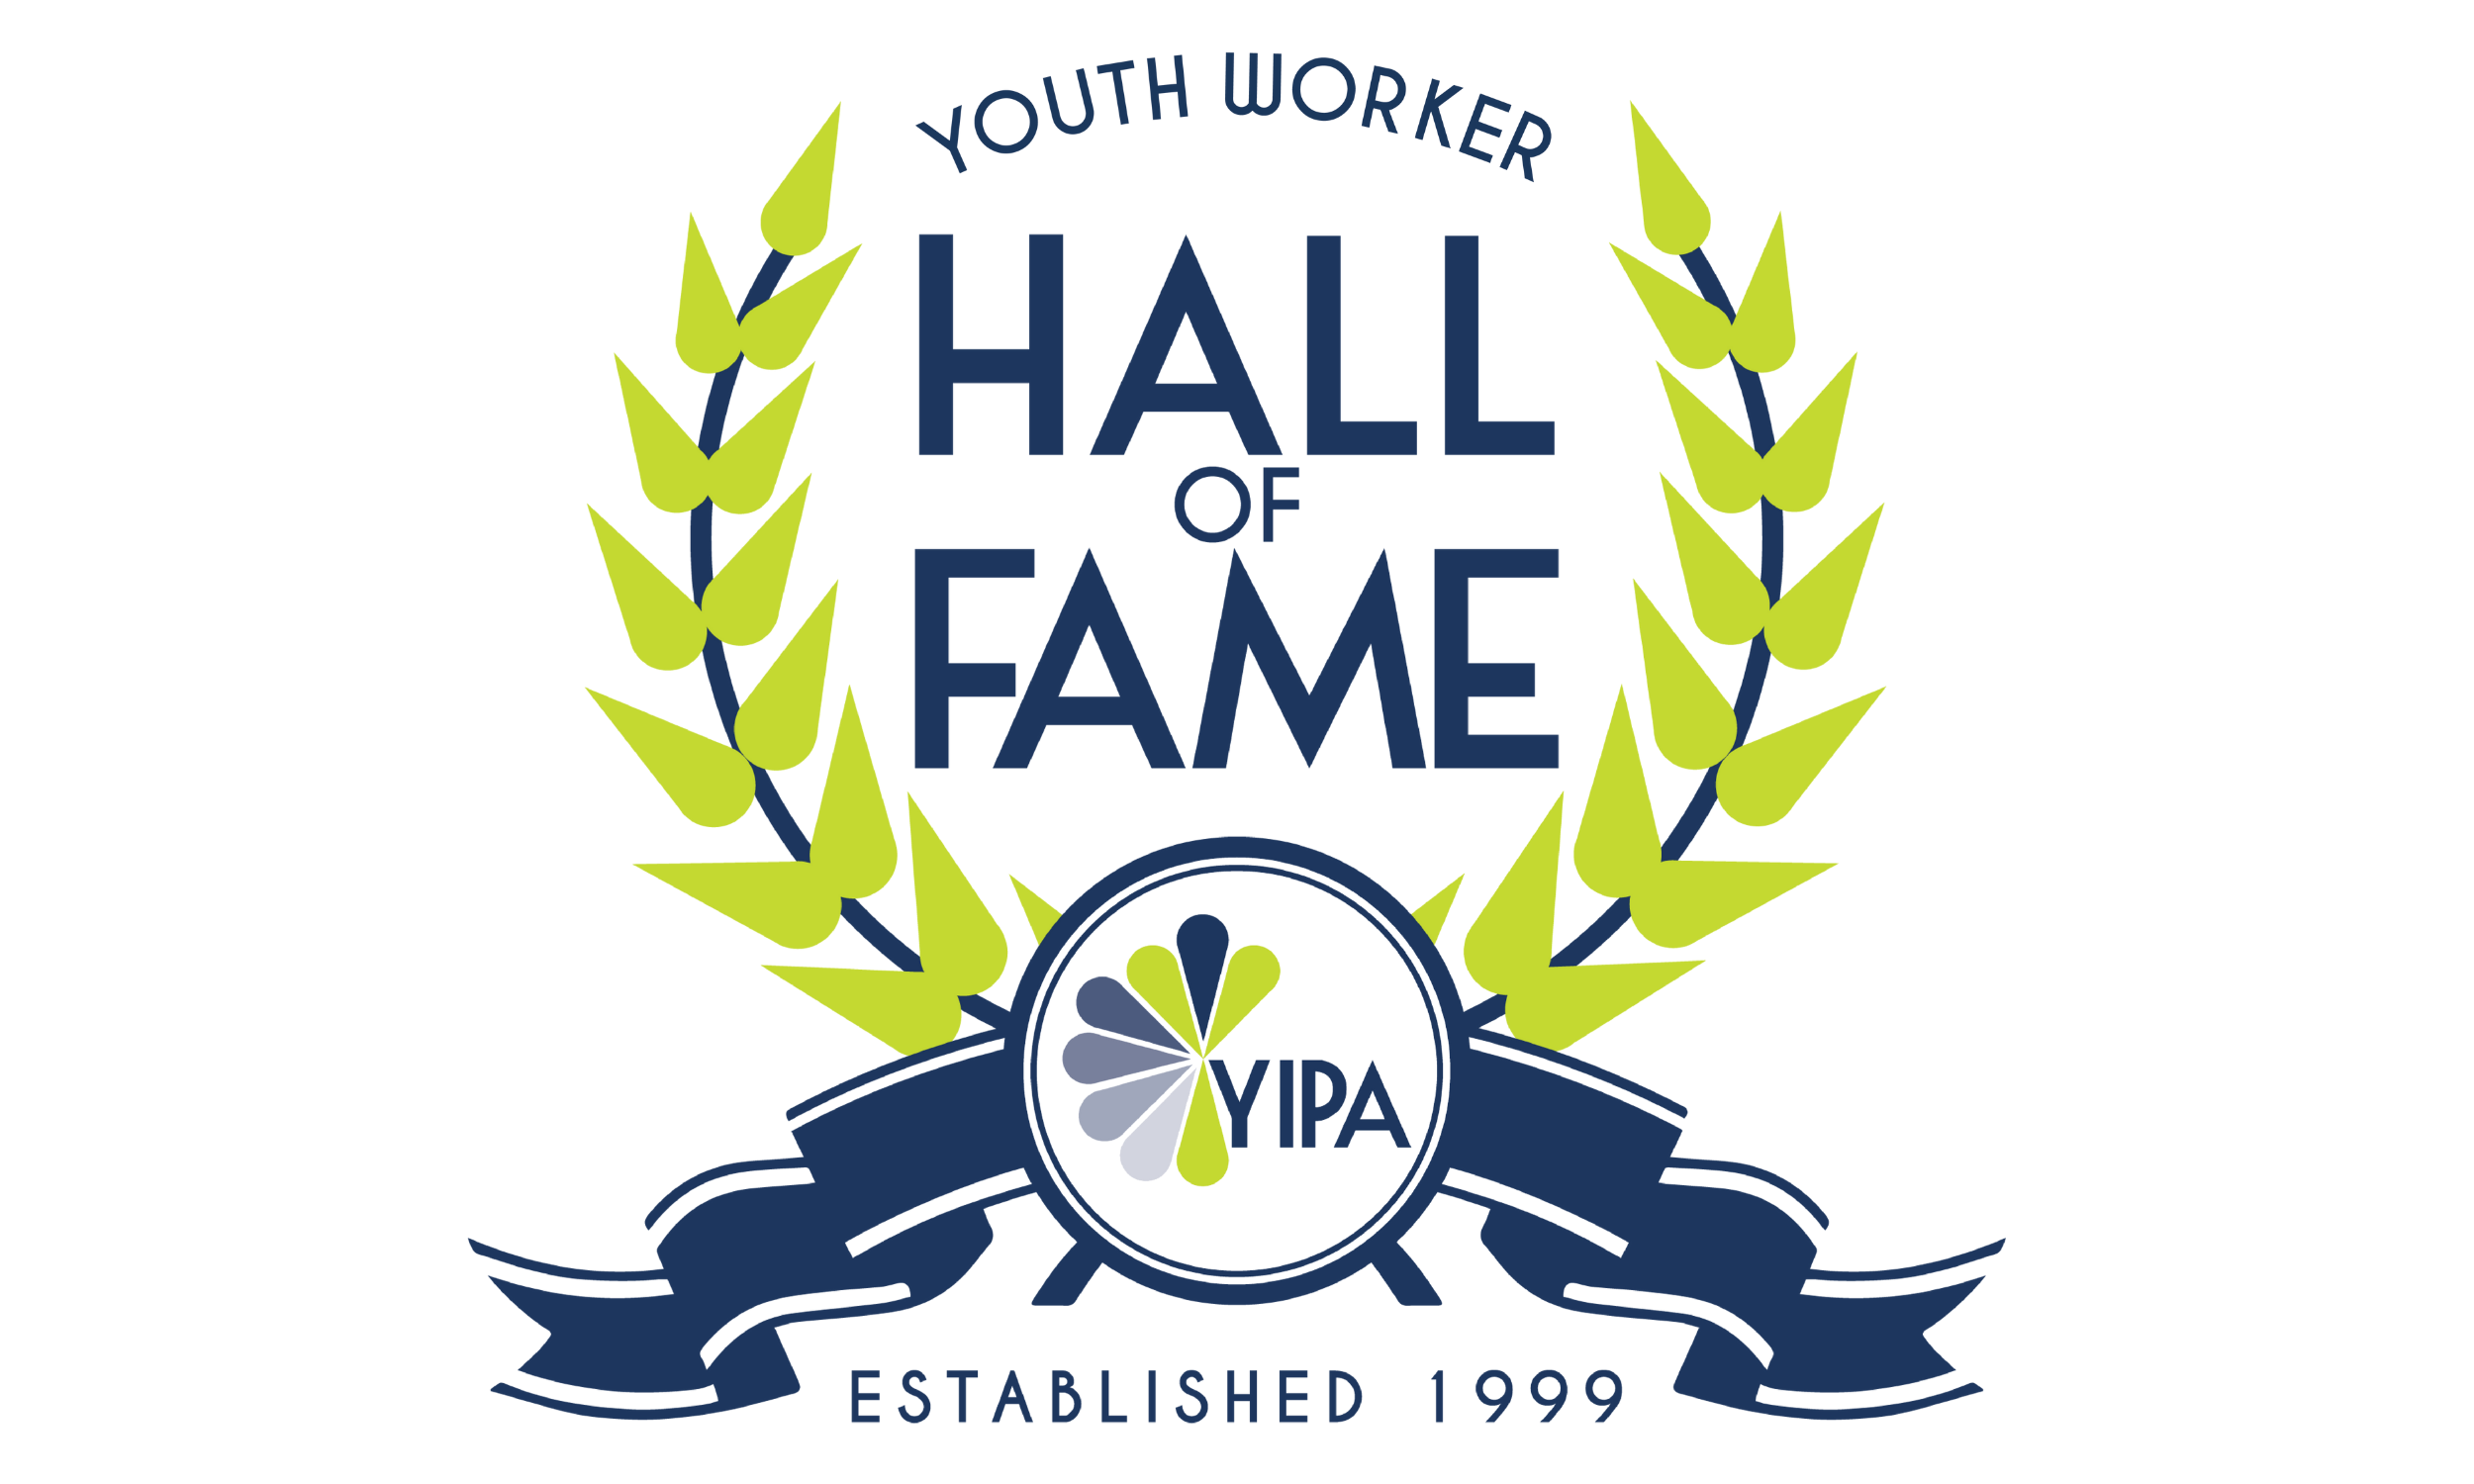 Youth Worker Hall of Fame